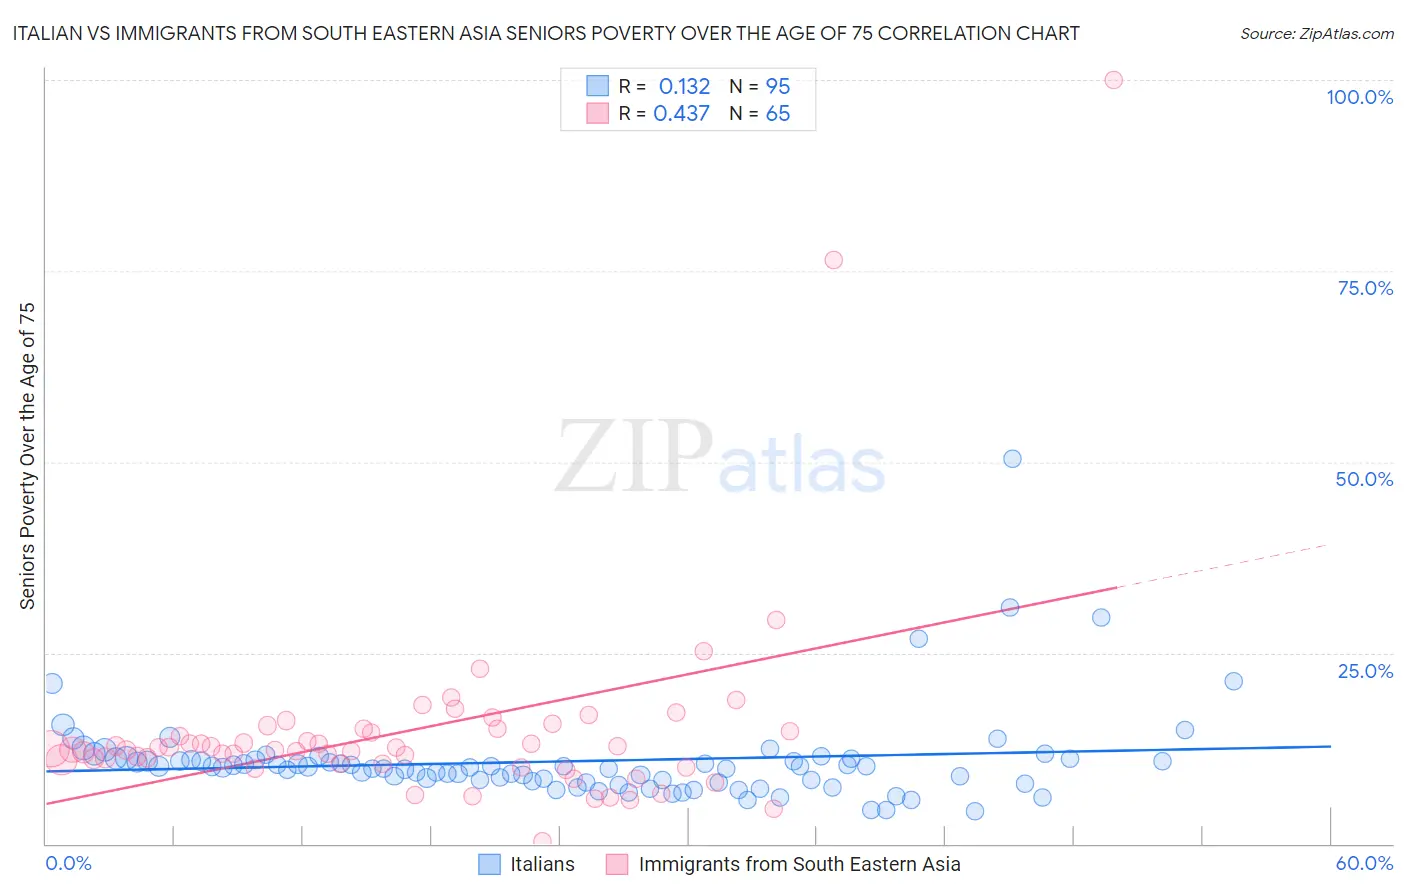 Italian vs Immigrants from South Eastern Asia Seniors Poverty Over the Age of 75